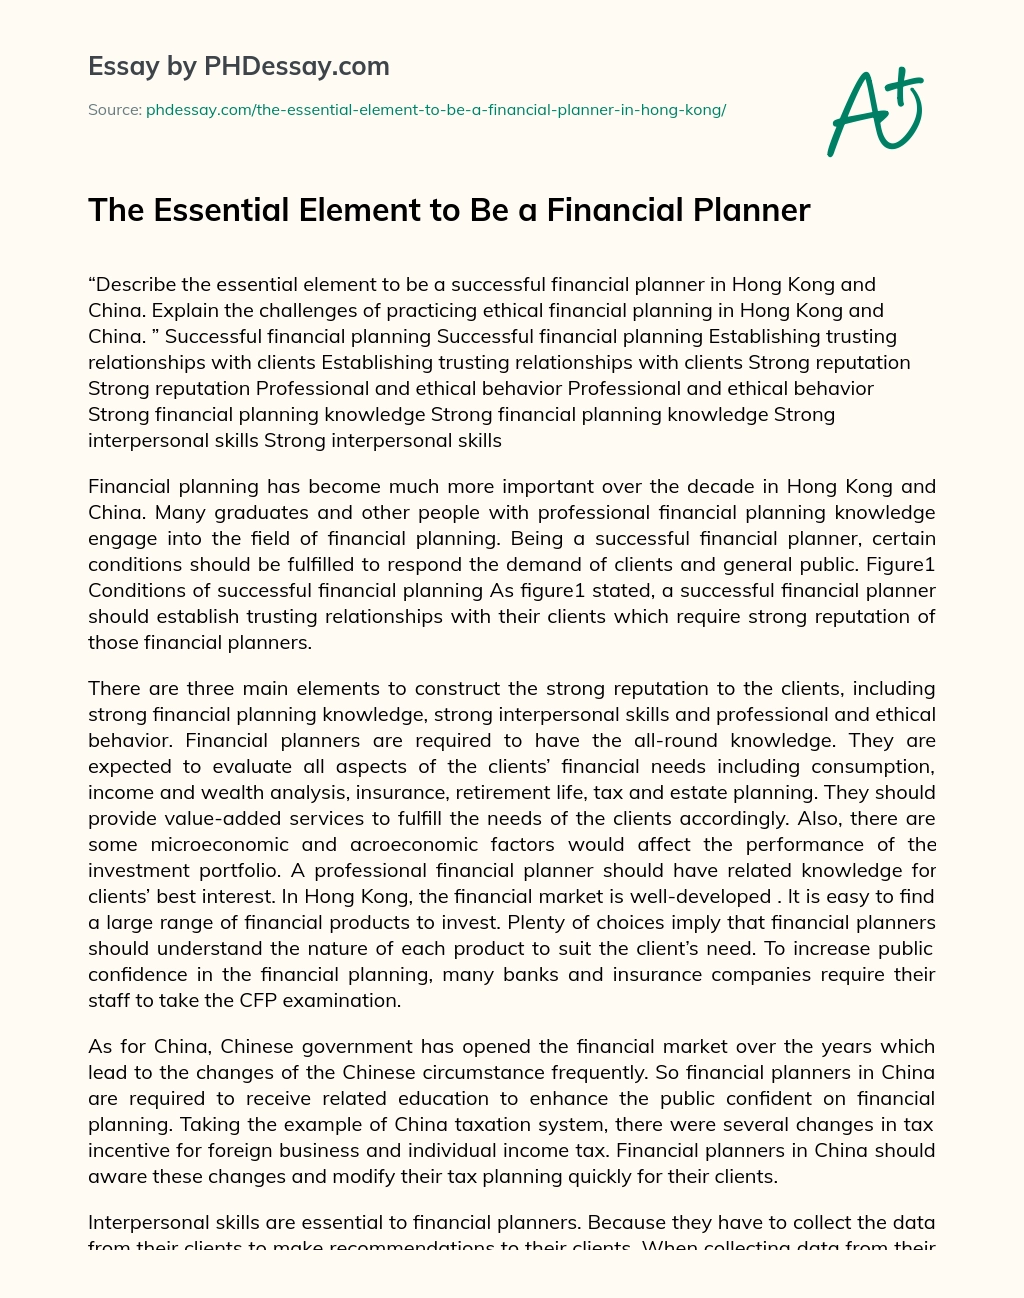 The Essential Element to Be a Financial Planner essay